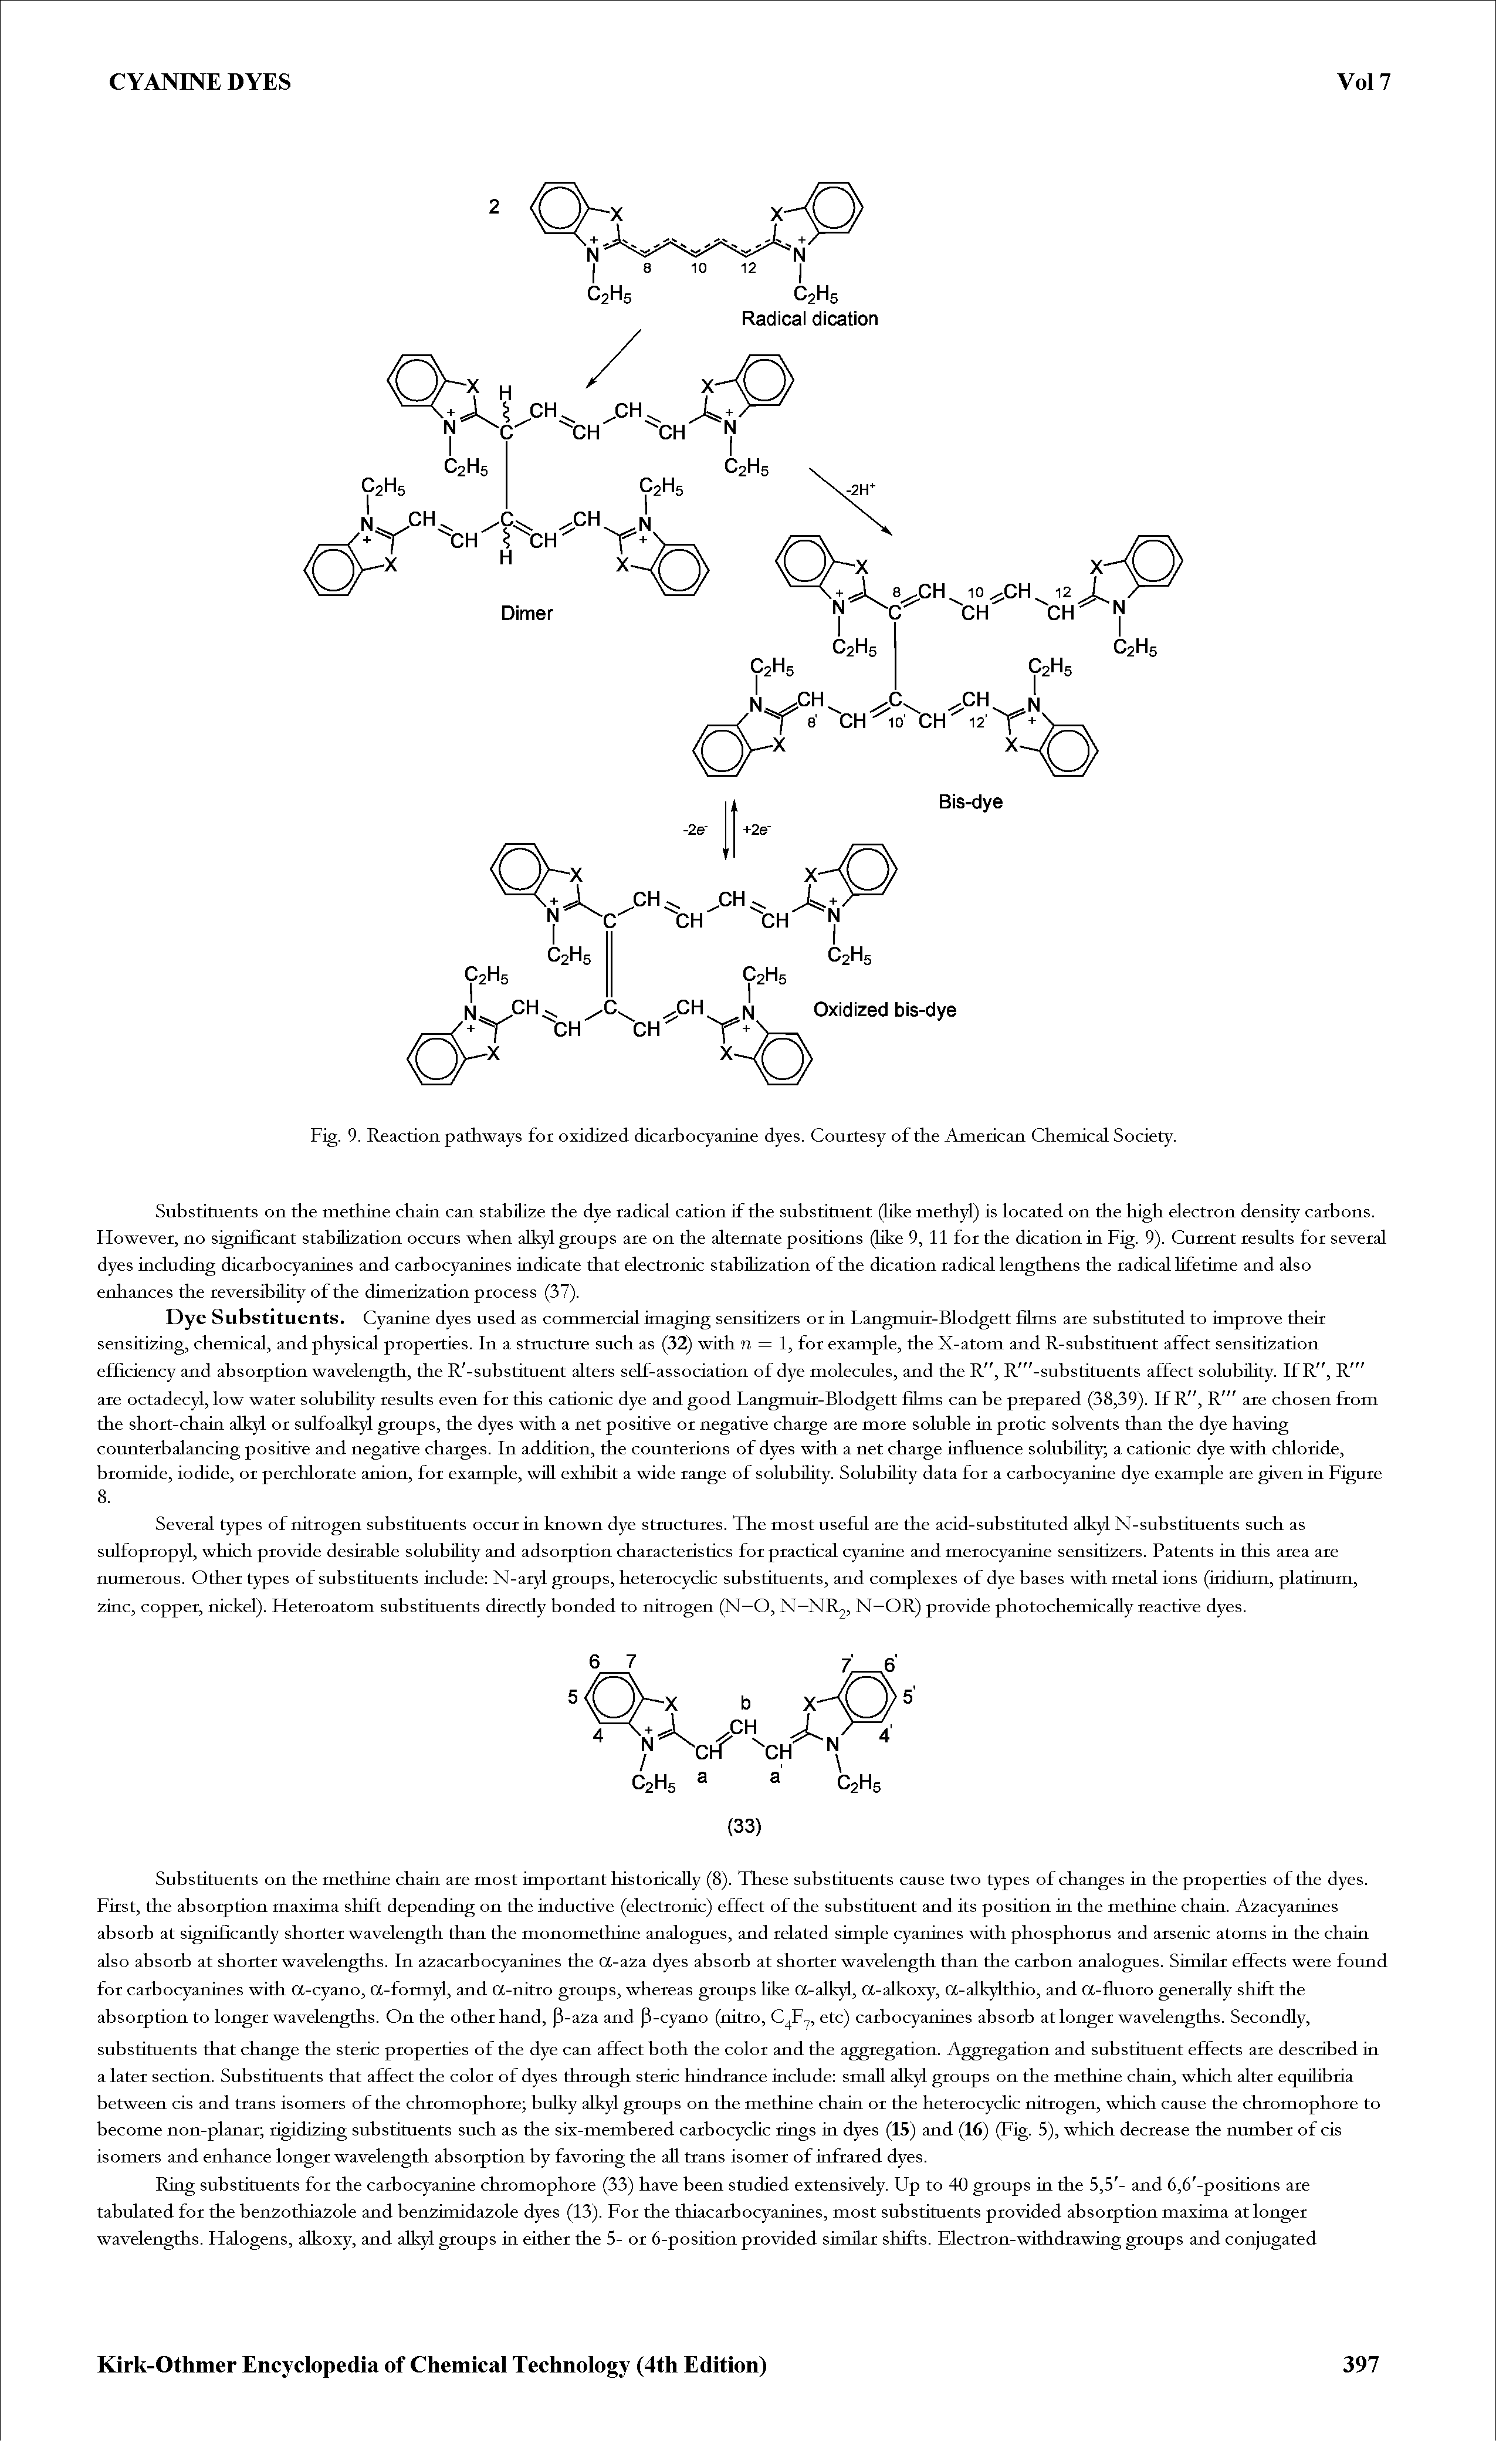 Fig. 9. Reaction pathways for oxidized diearbocyanine dyes. Courtesy of the American Chemical Society.